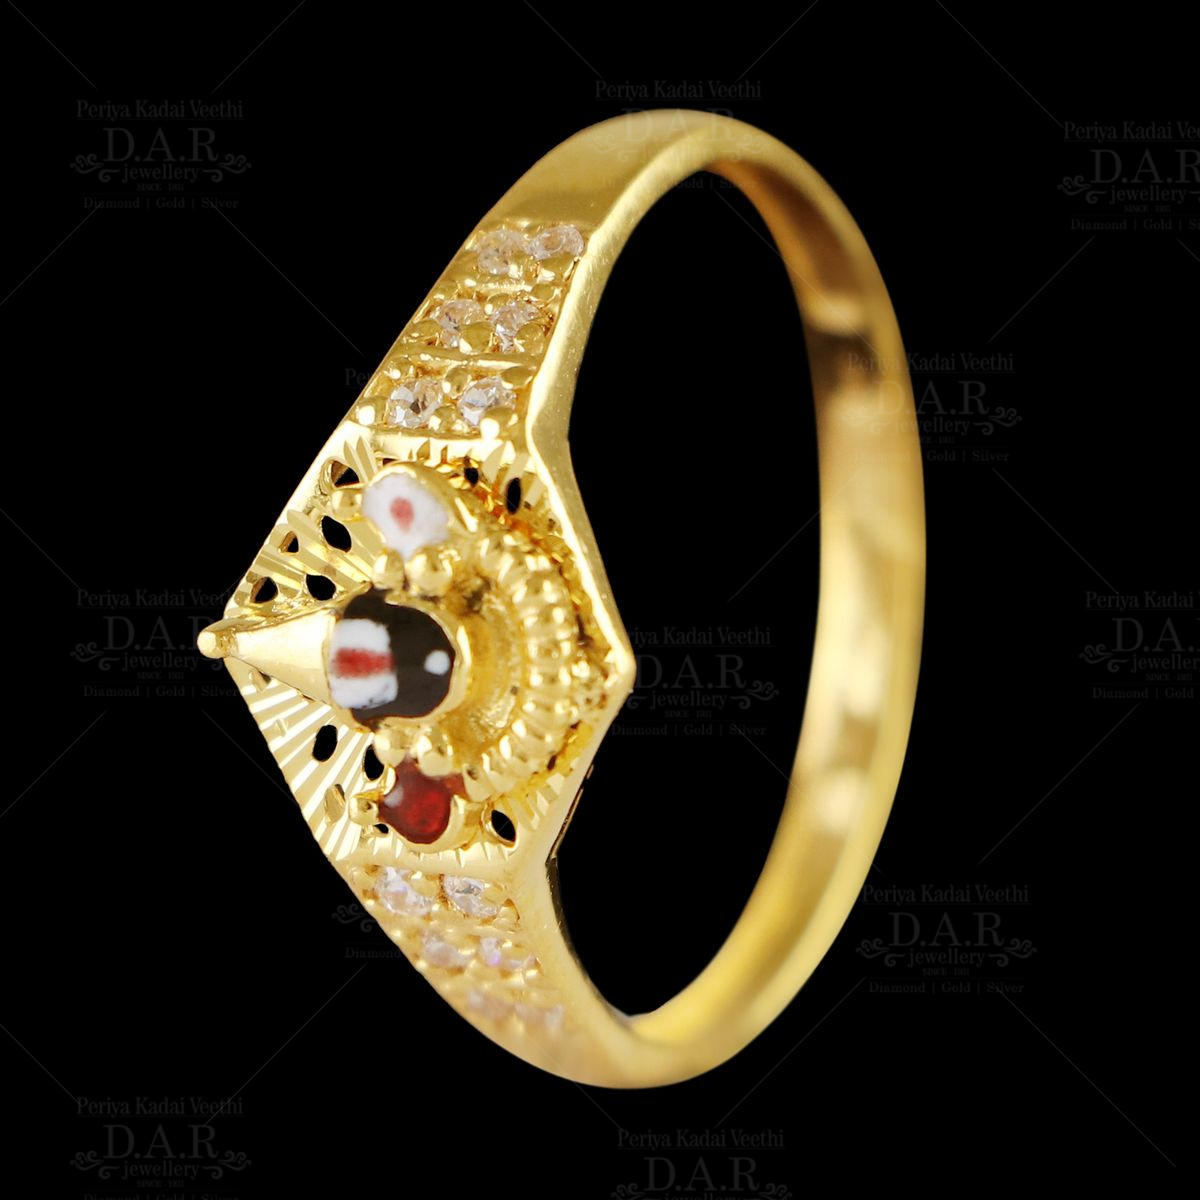 Lord Balaji Divine Gents Ring | G.Rajam Chetty And Sons Jewellers